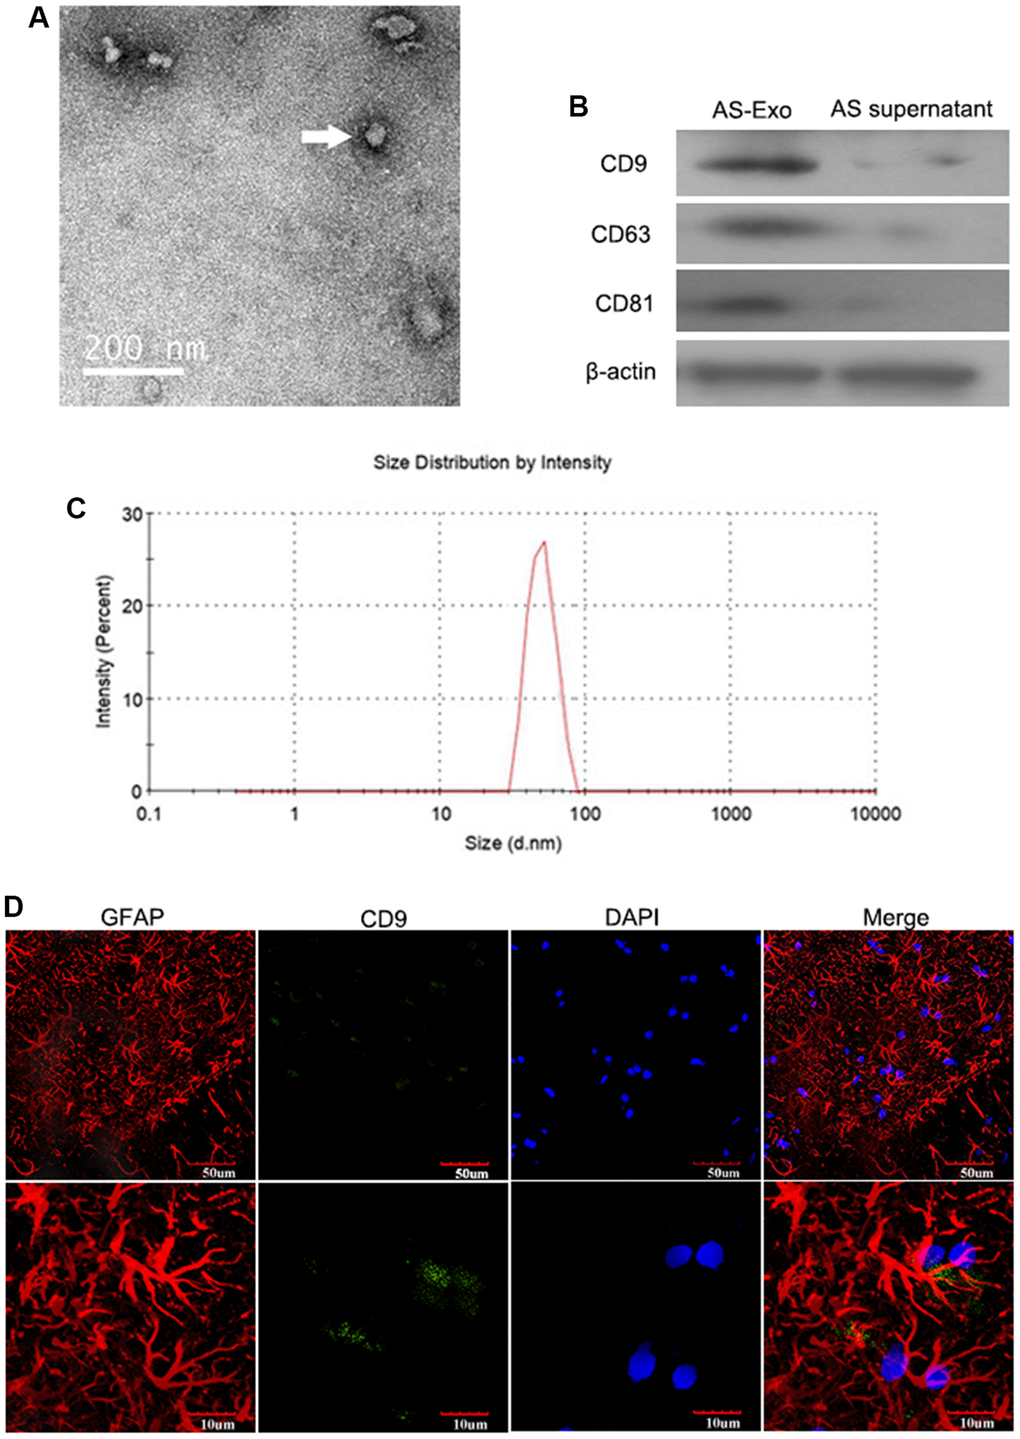 Characterization of AS-Exosomes. (A) Representative transmission electron microscopy (TEM) image show exosomes generated by primary astrocytes. (B) Western blot analysis shows expression levels of exosomal biomarkers such as CD9, CD63, CD81, HSP90B1, and GM130 in astrocyte-derived exosomes (AS-Exo) and astrocyte supernatant. (C) Particle size analysis of AS-Exo. (D) The identification of astrocytes and AS-Exo.